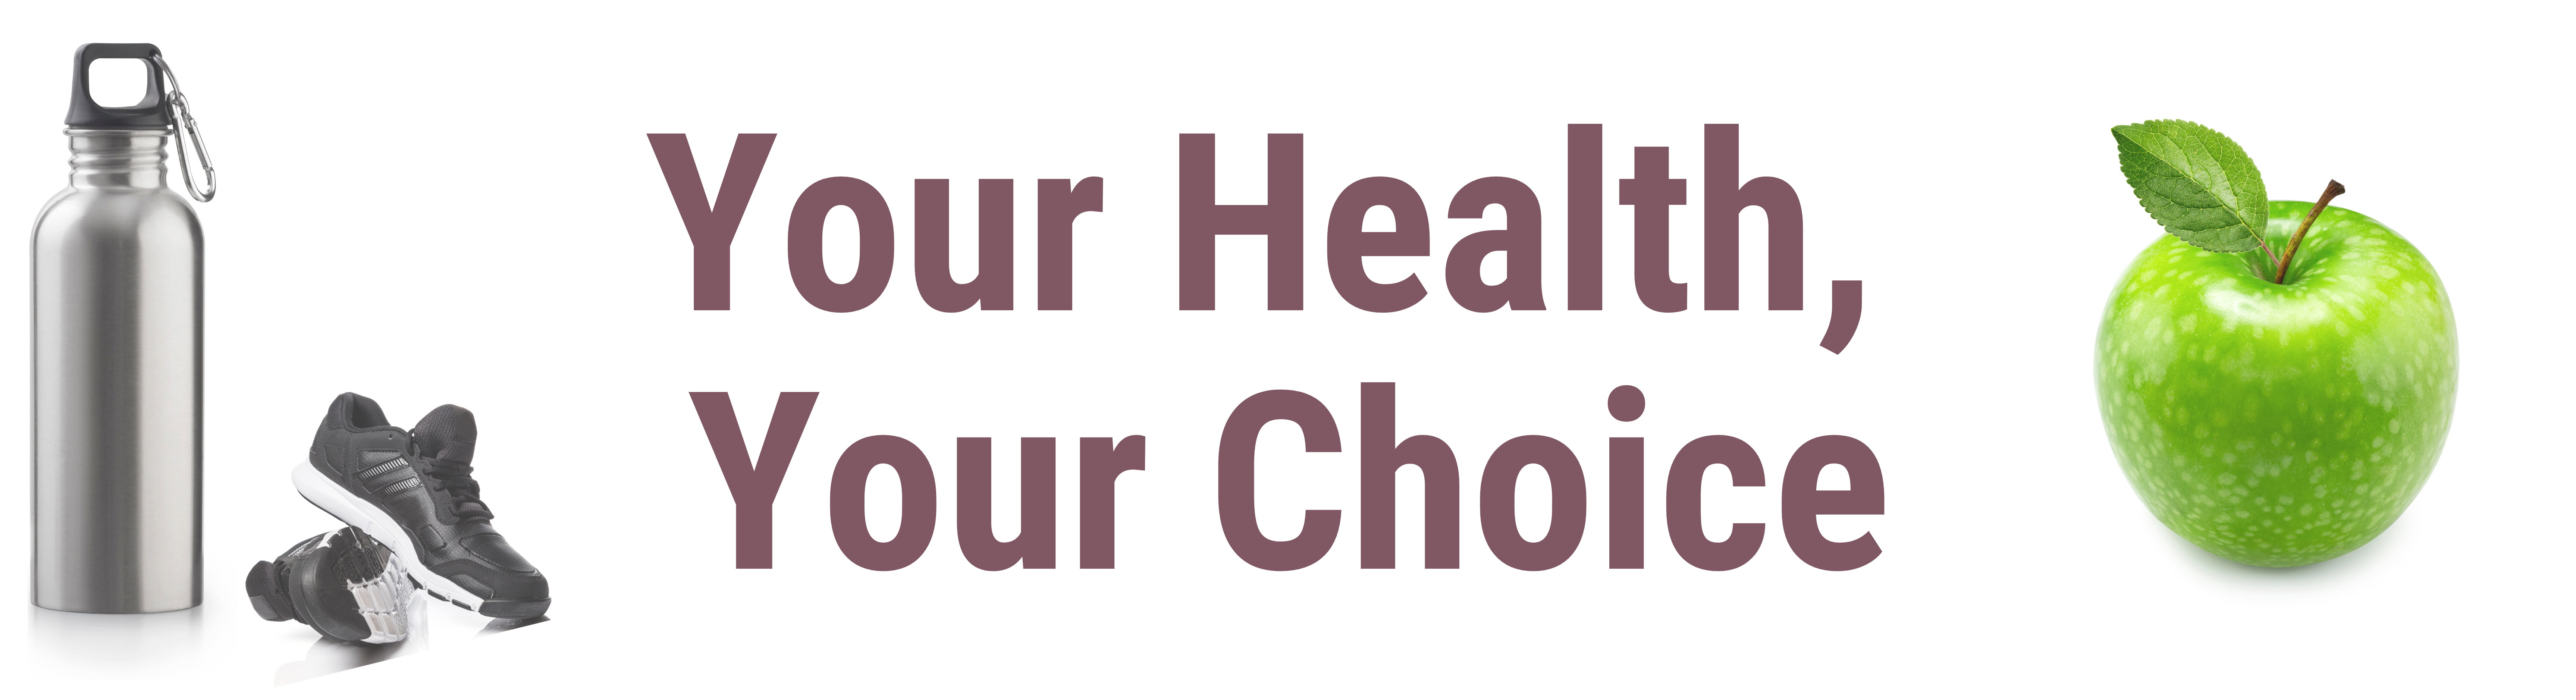 Healthy Choices Your Choice Your Health Banner